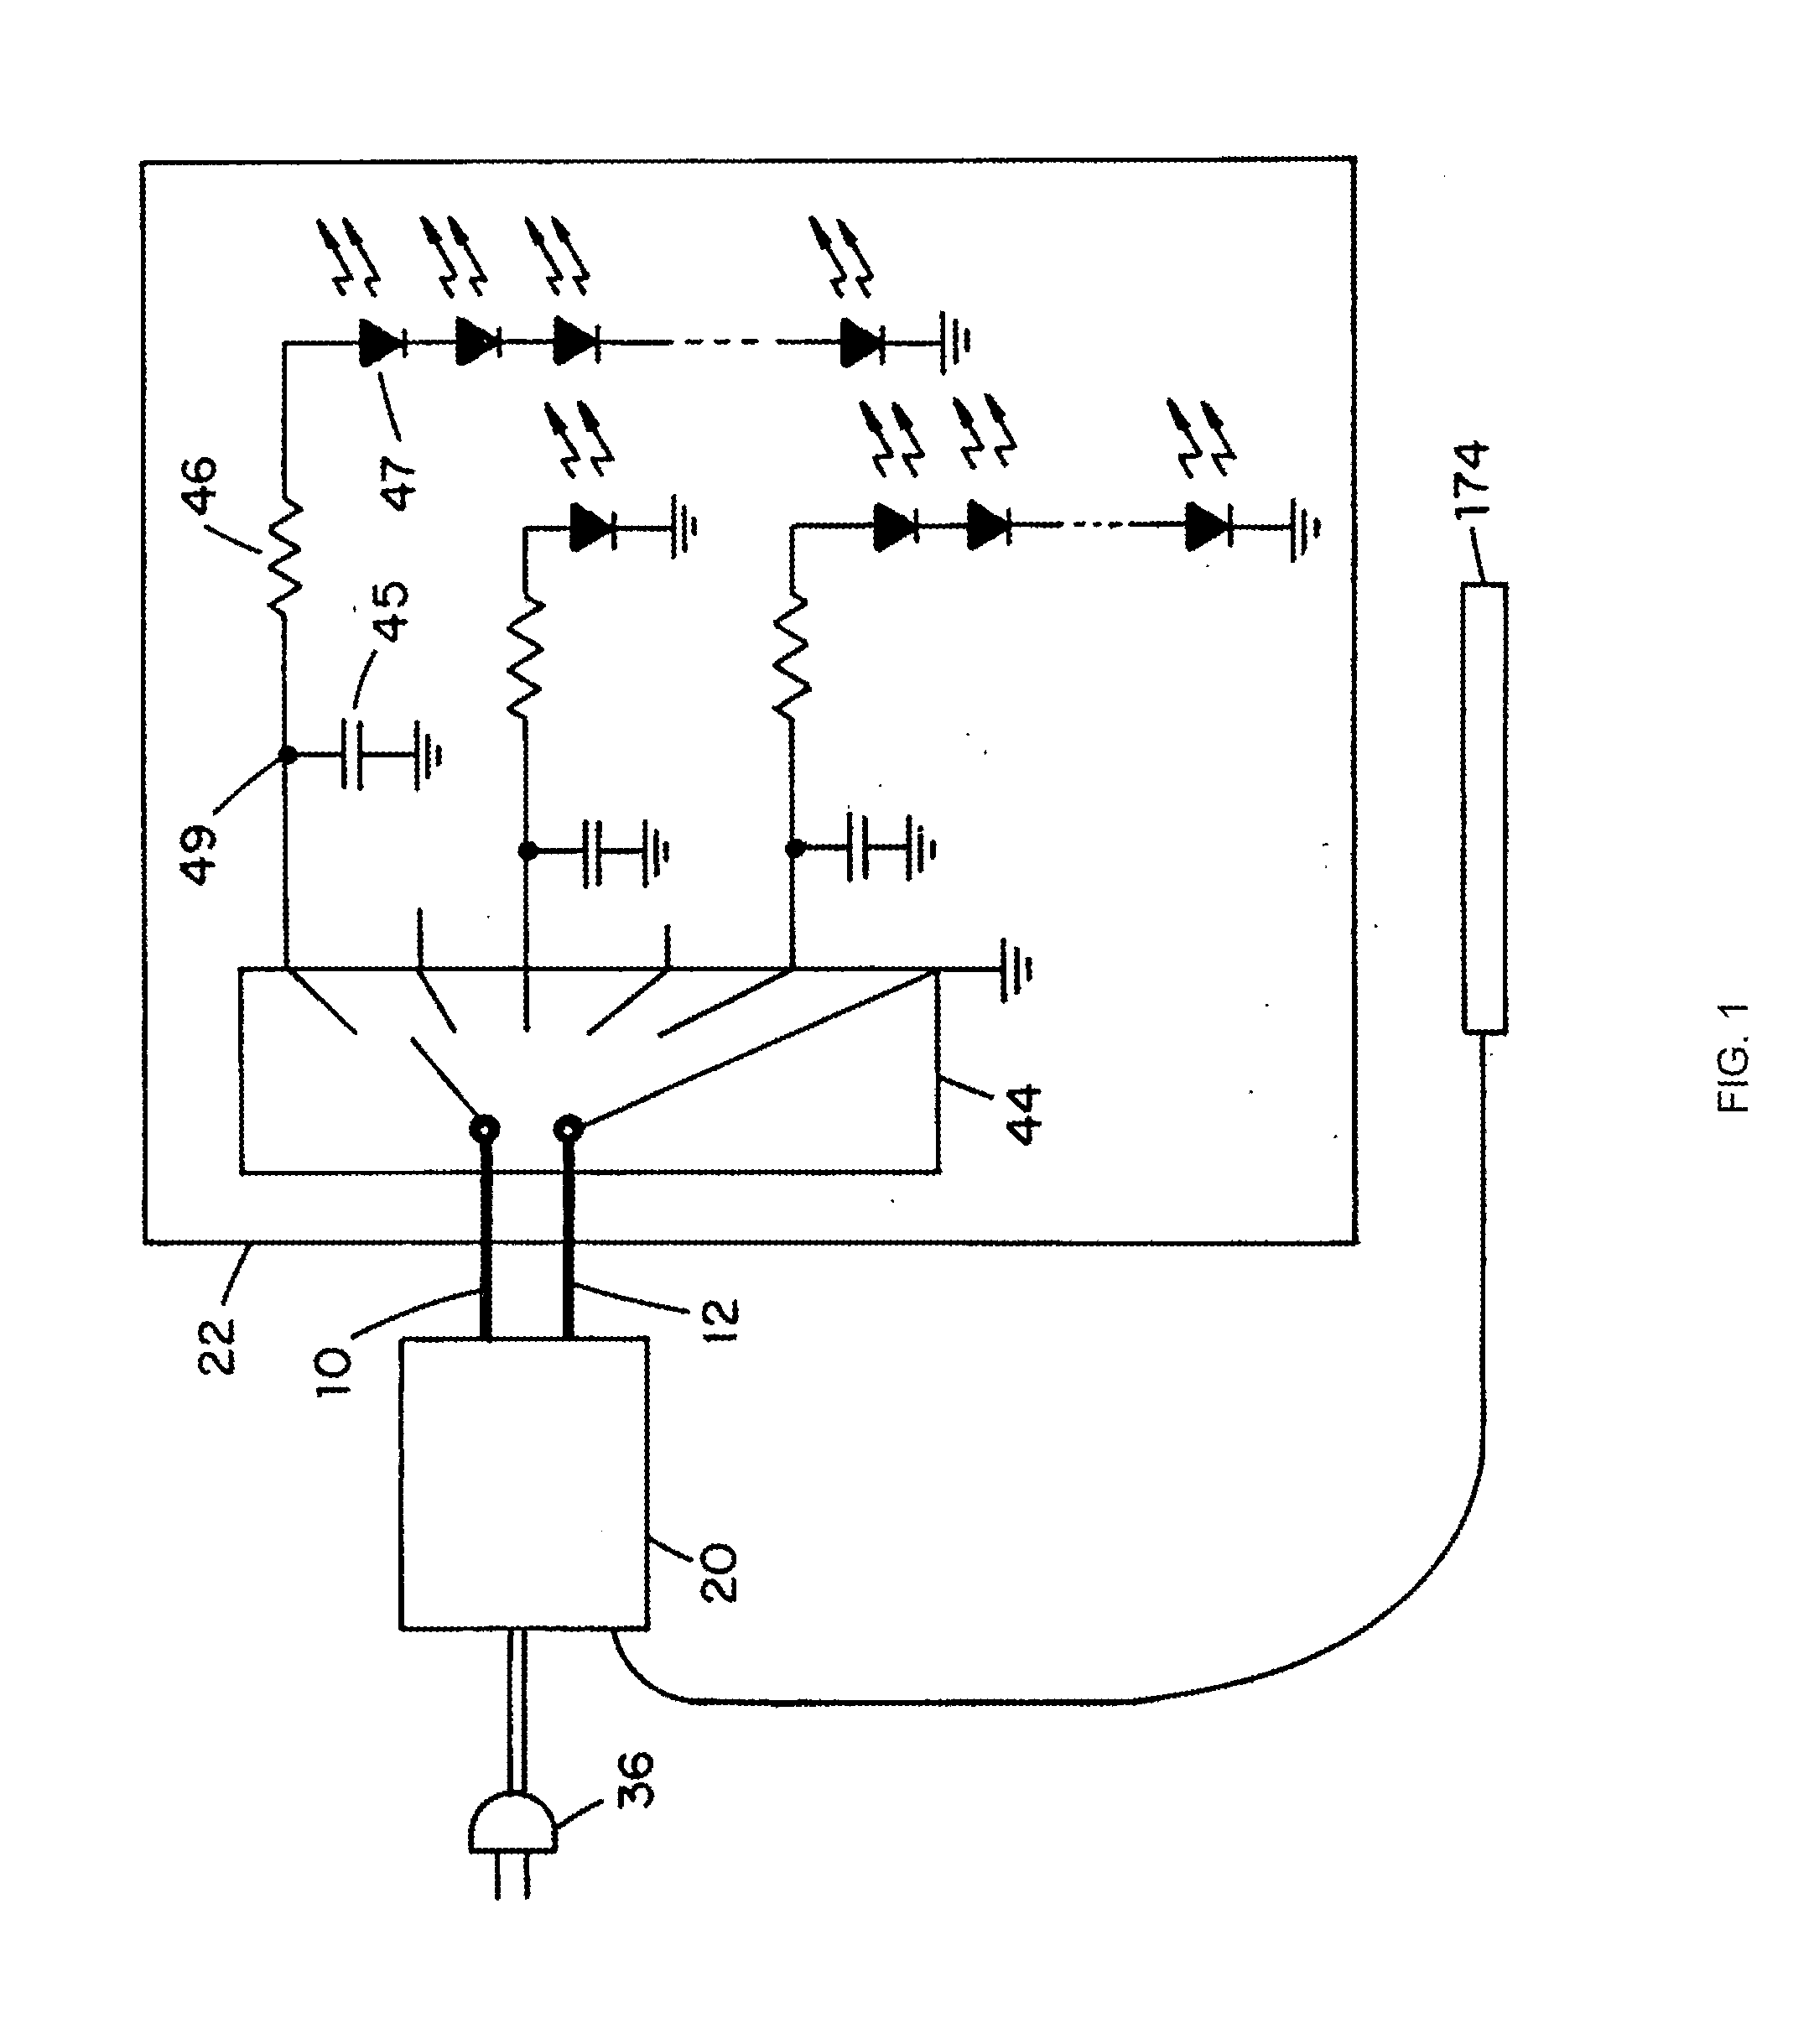 Skin tanning and light therapy incorporating light emitting diodes